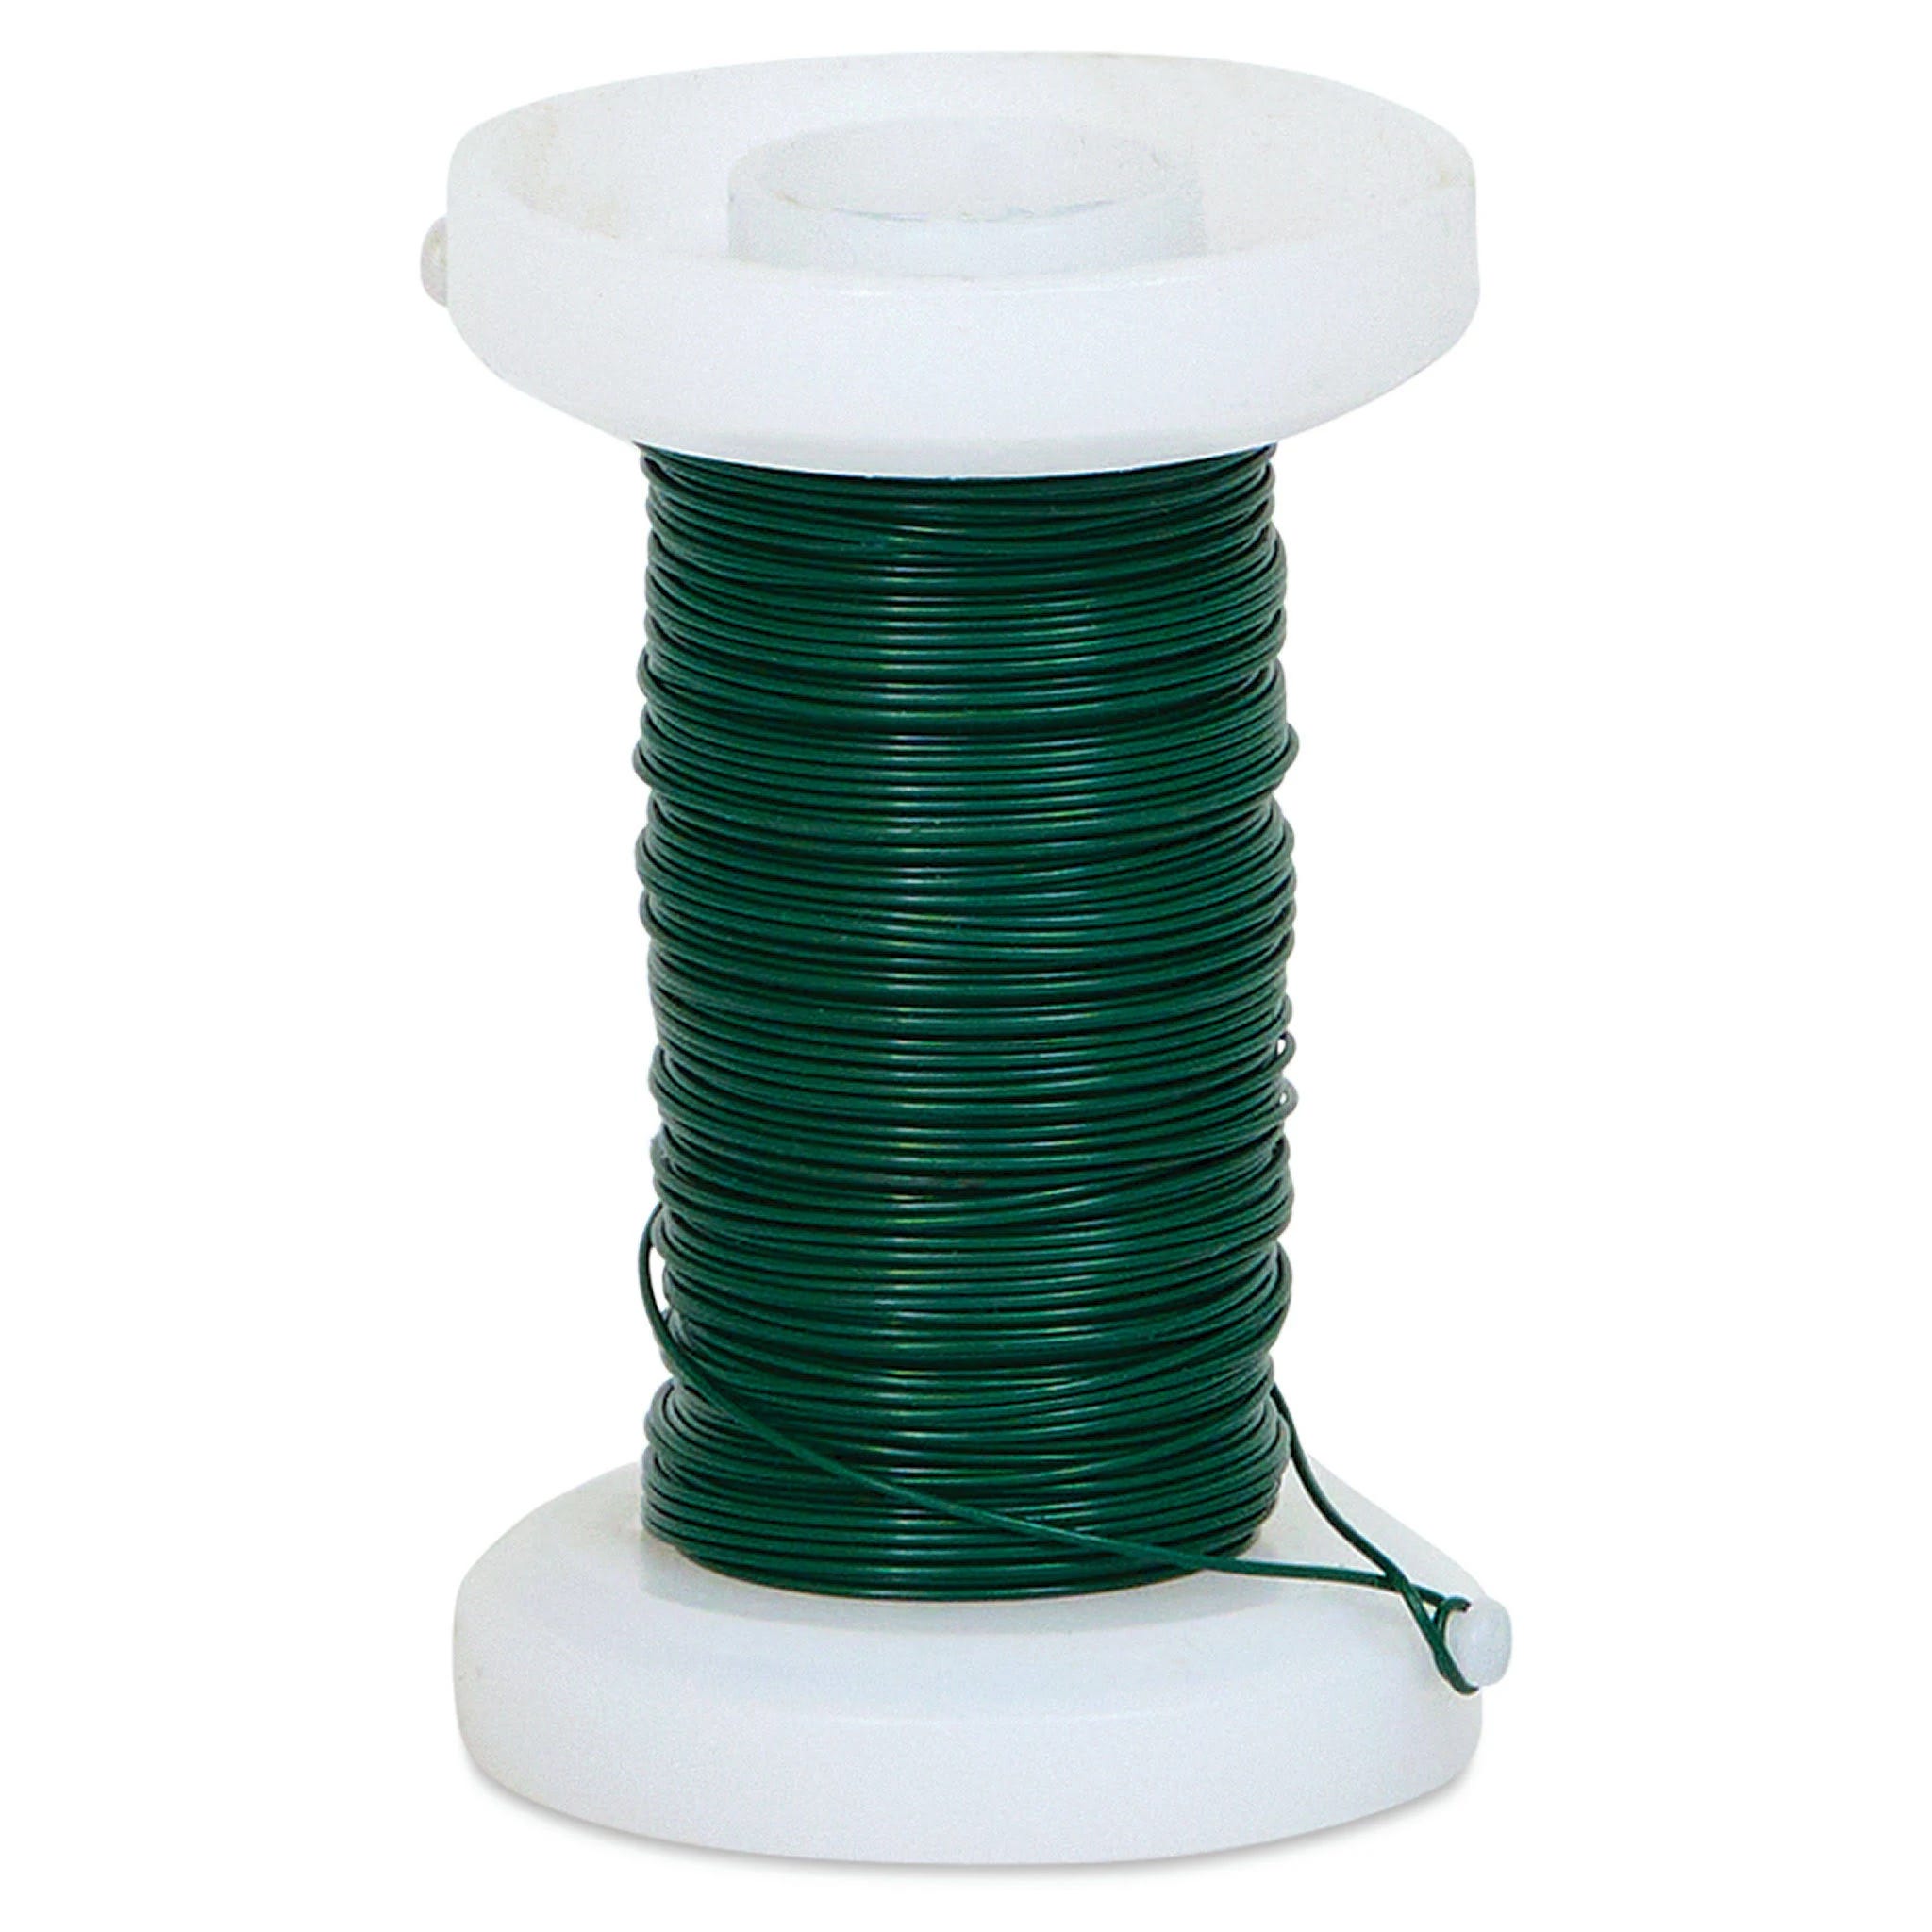 Green Floral Spool Wire for Organizing Arrangements | Image